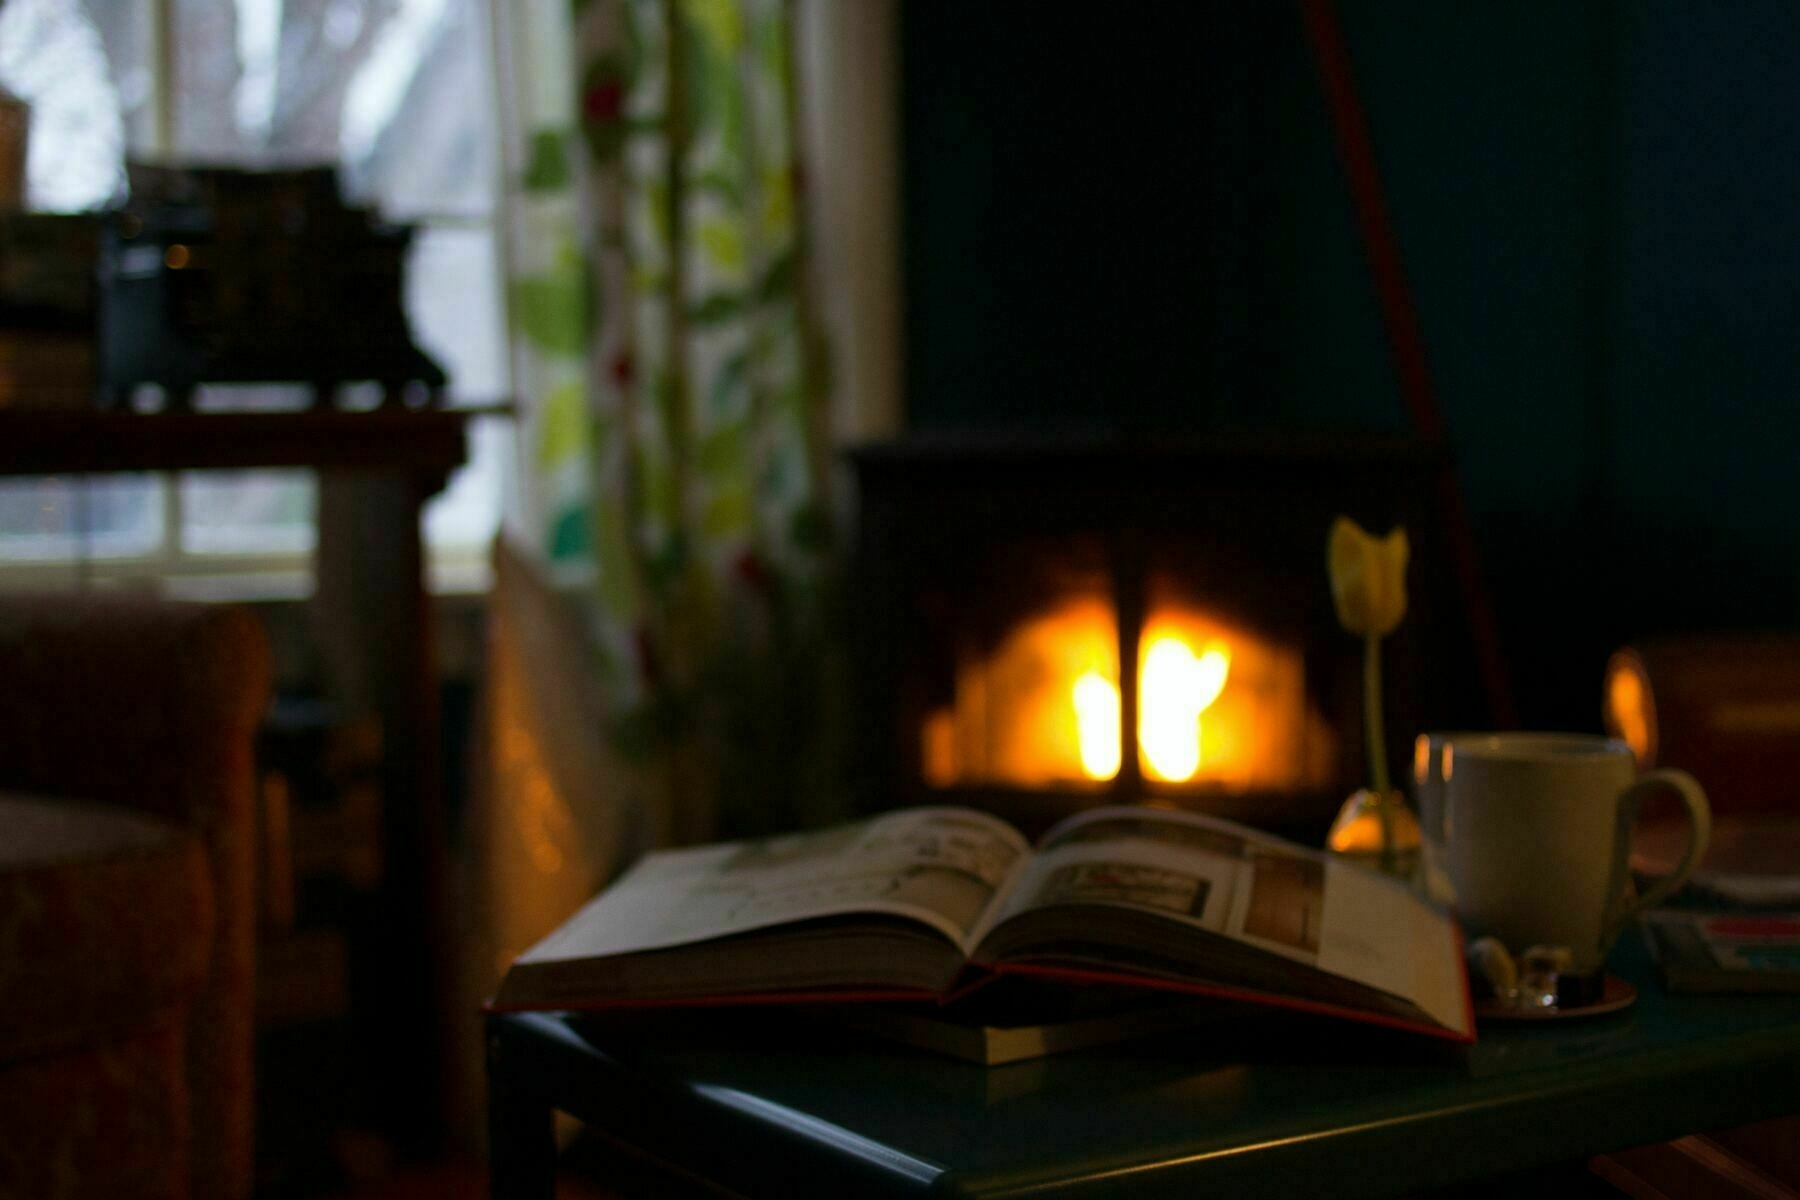 A book is open on a table. A fire in a fireplace is in the background.